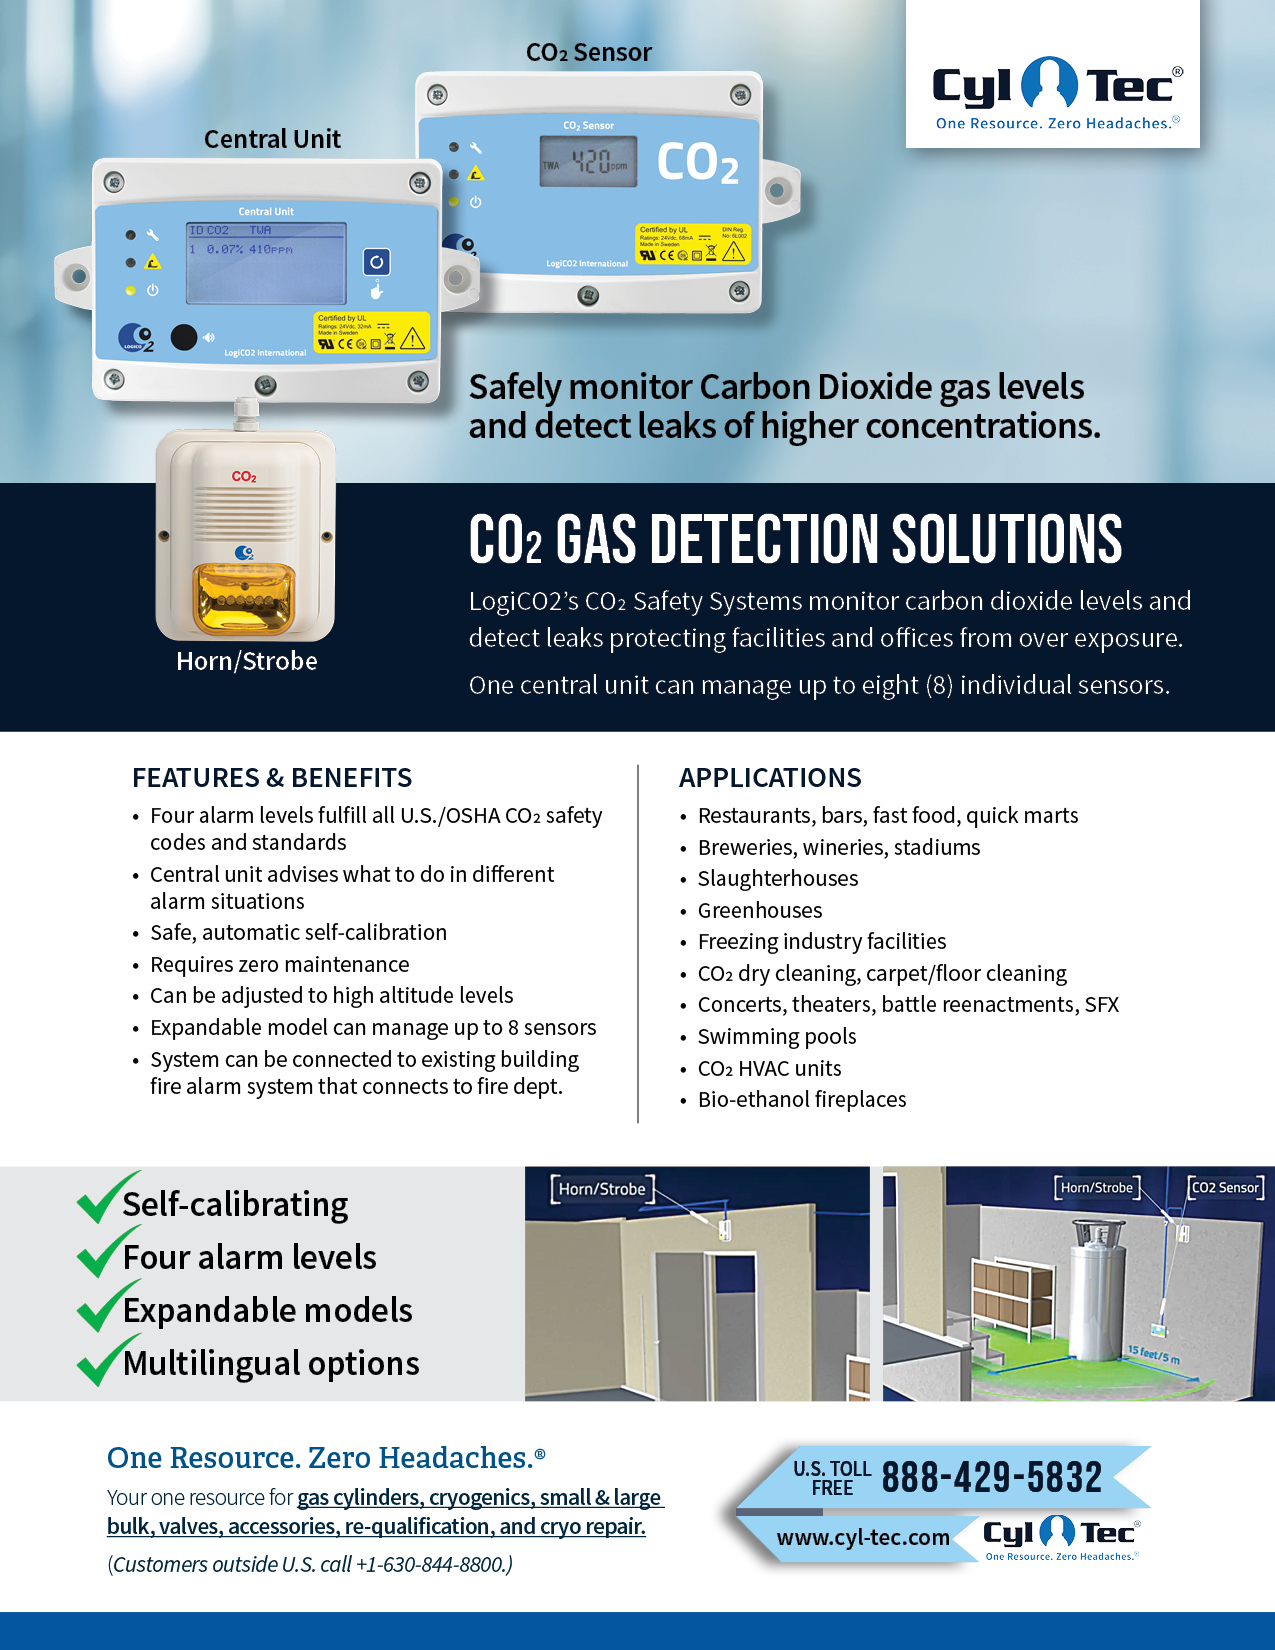 CylTec CO2 Gas Detection Solutions